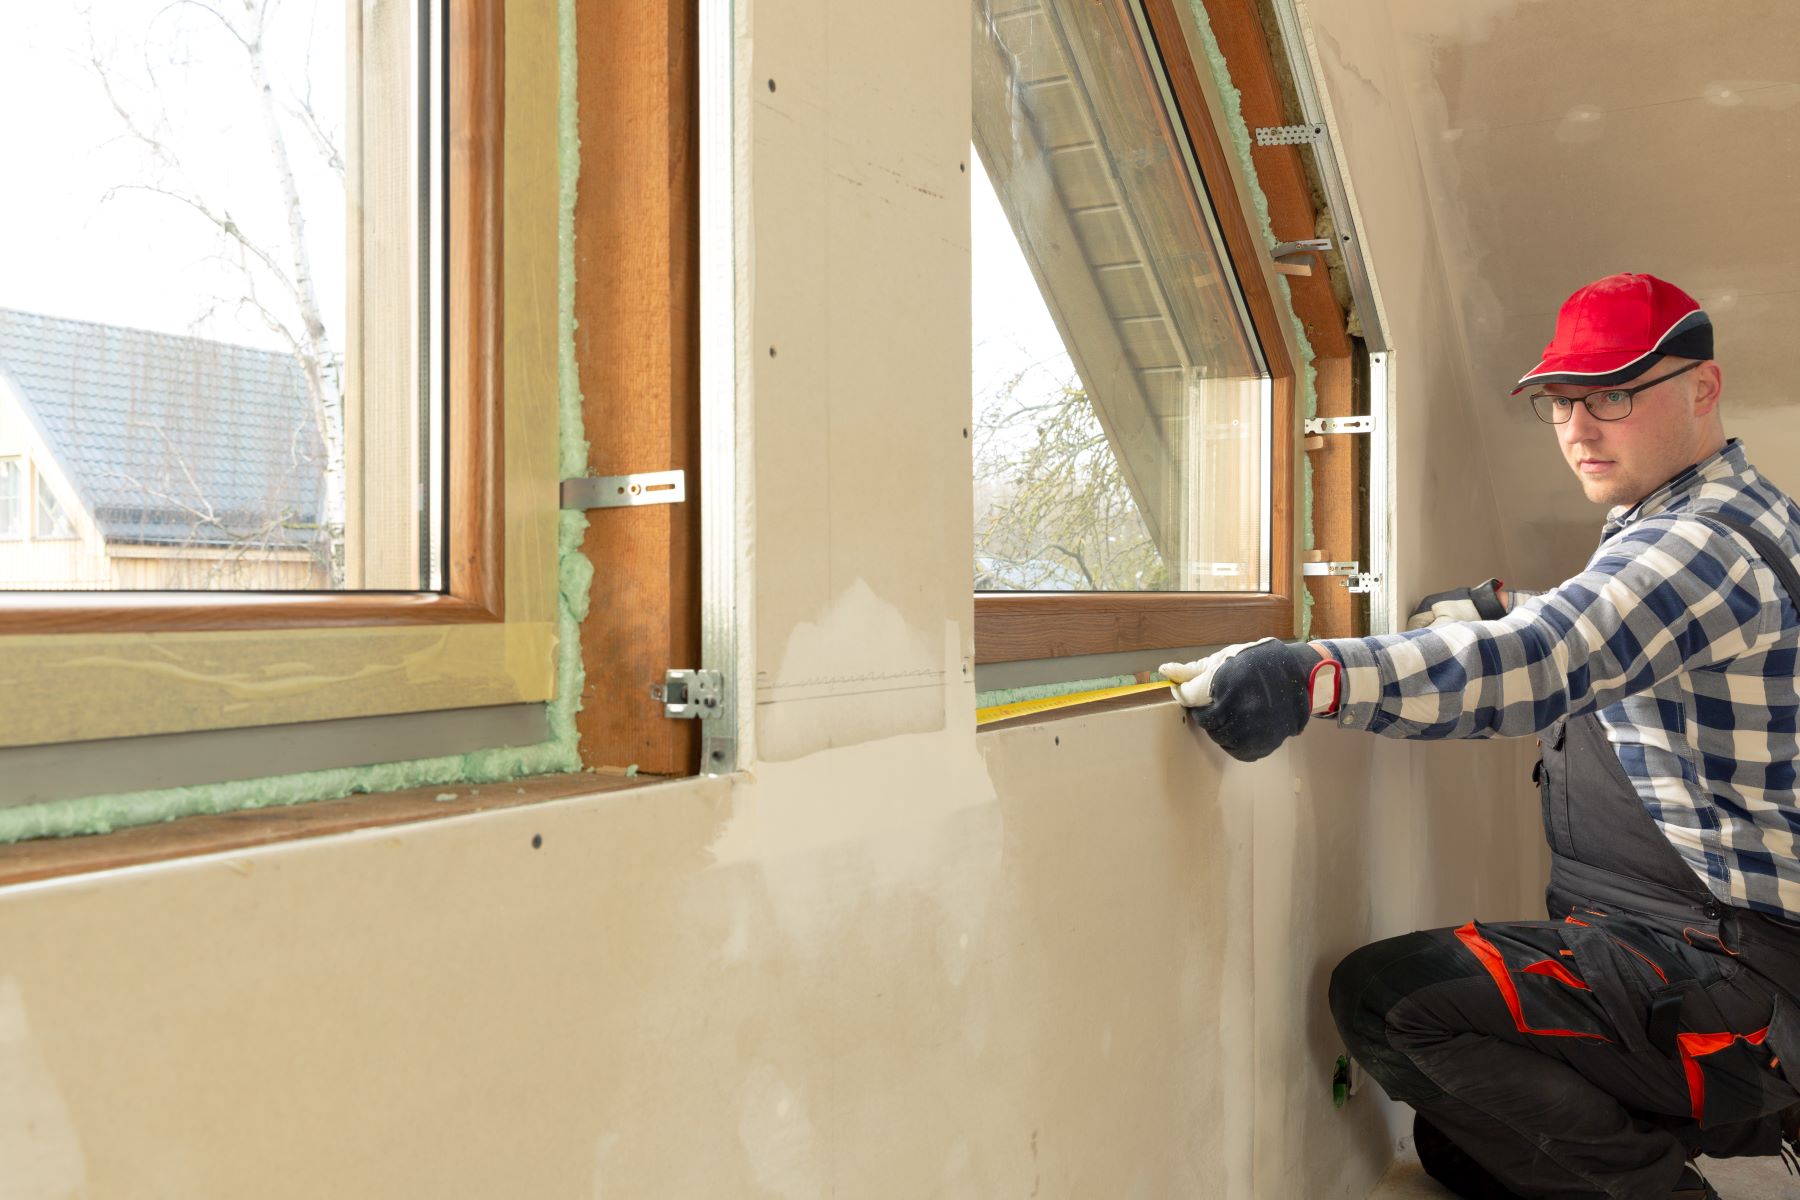 What Grants Are Available For Home Improvements In The UK?